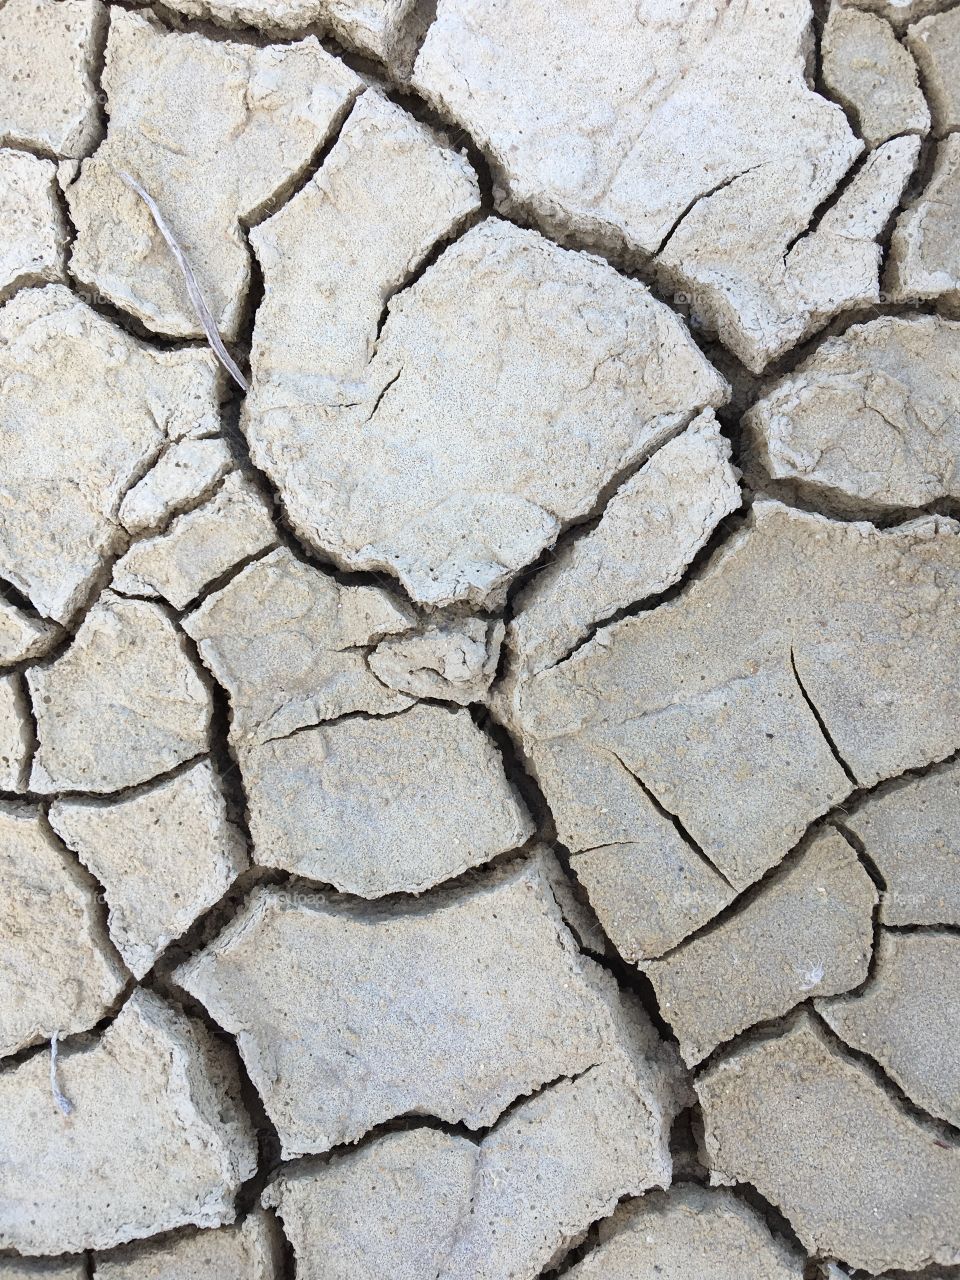 Drought in crushed dehydrated soils